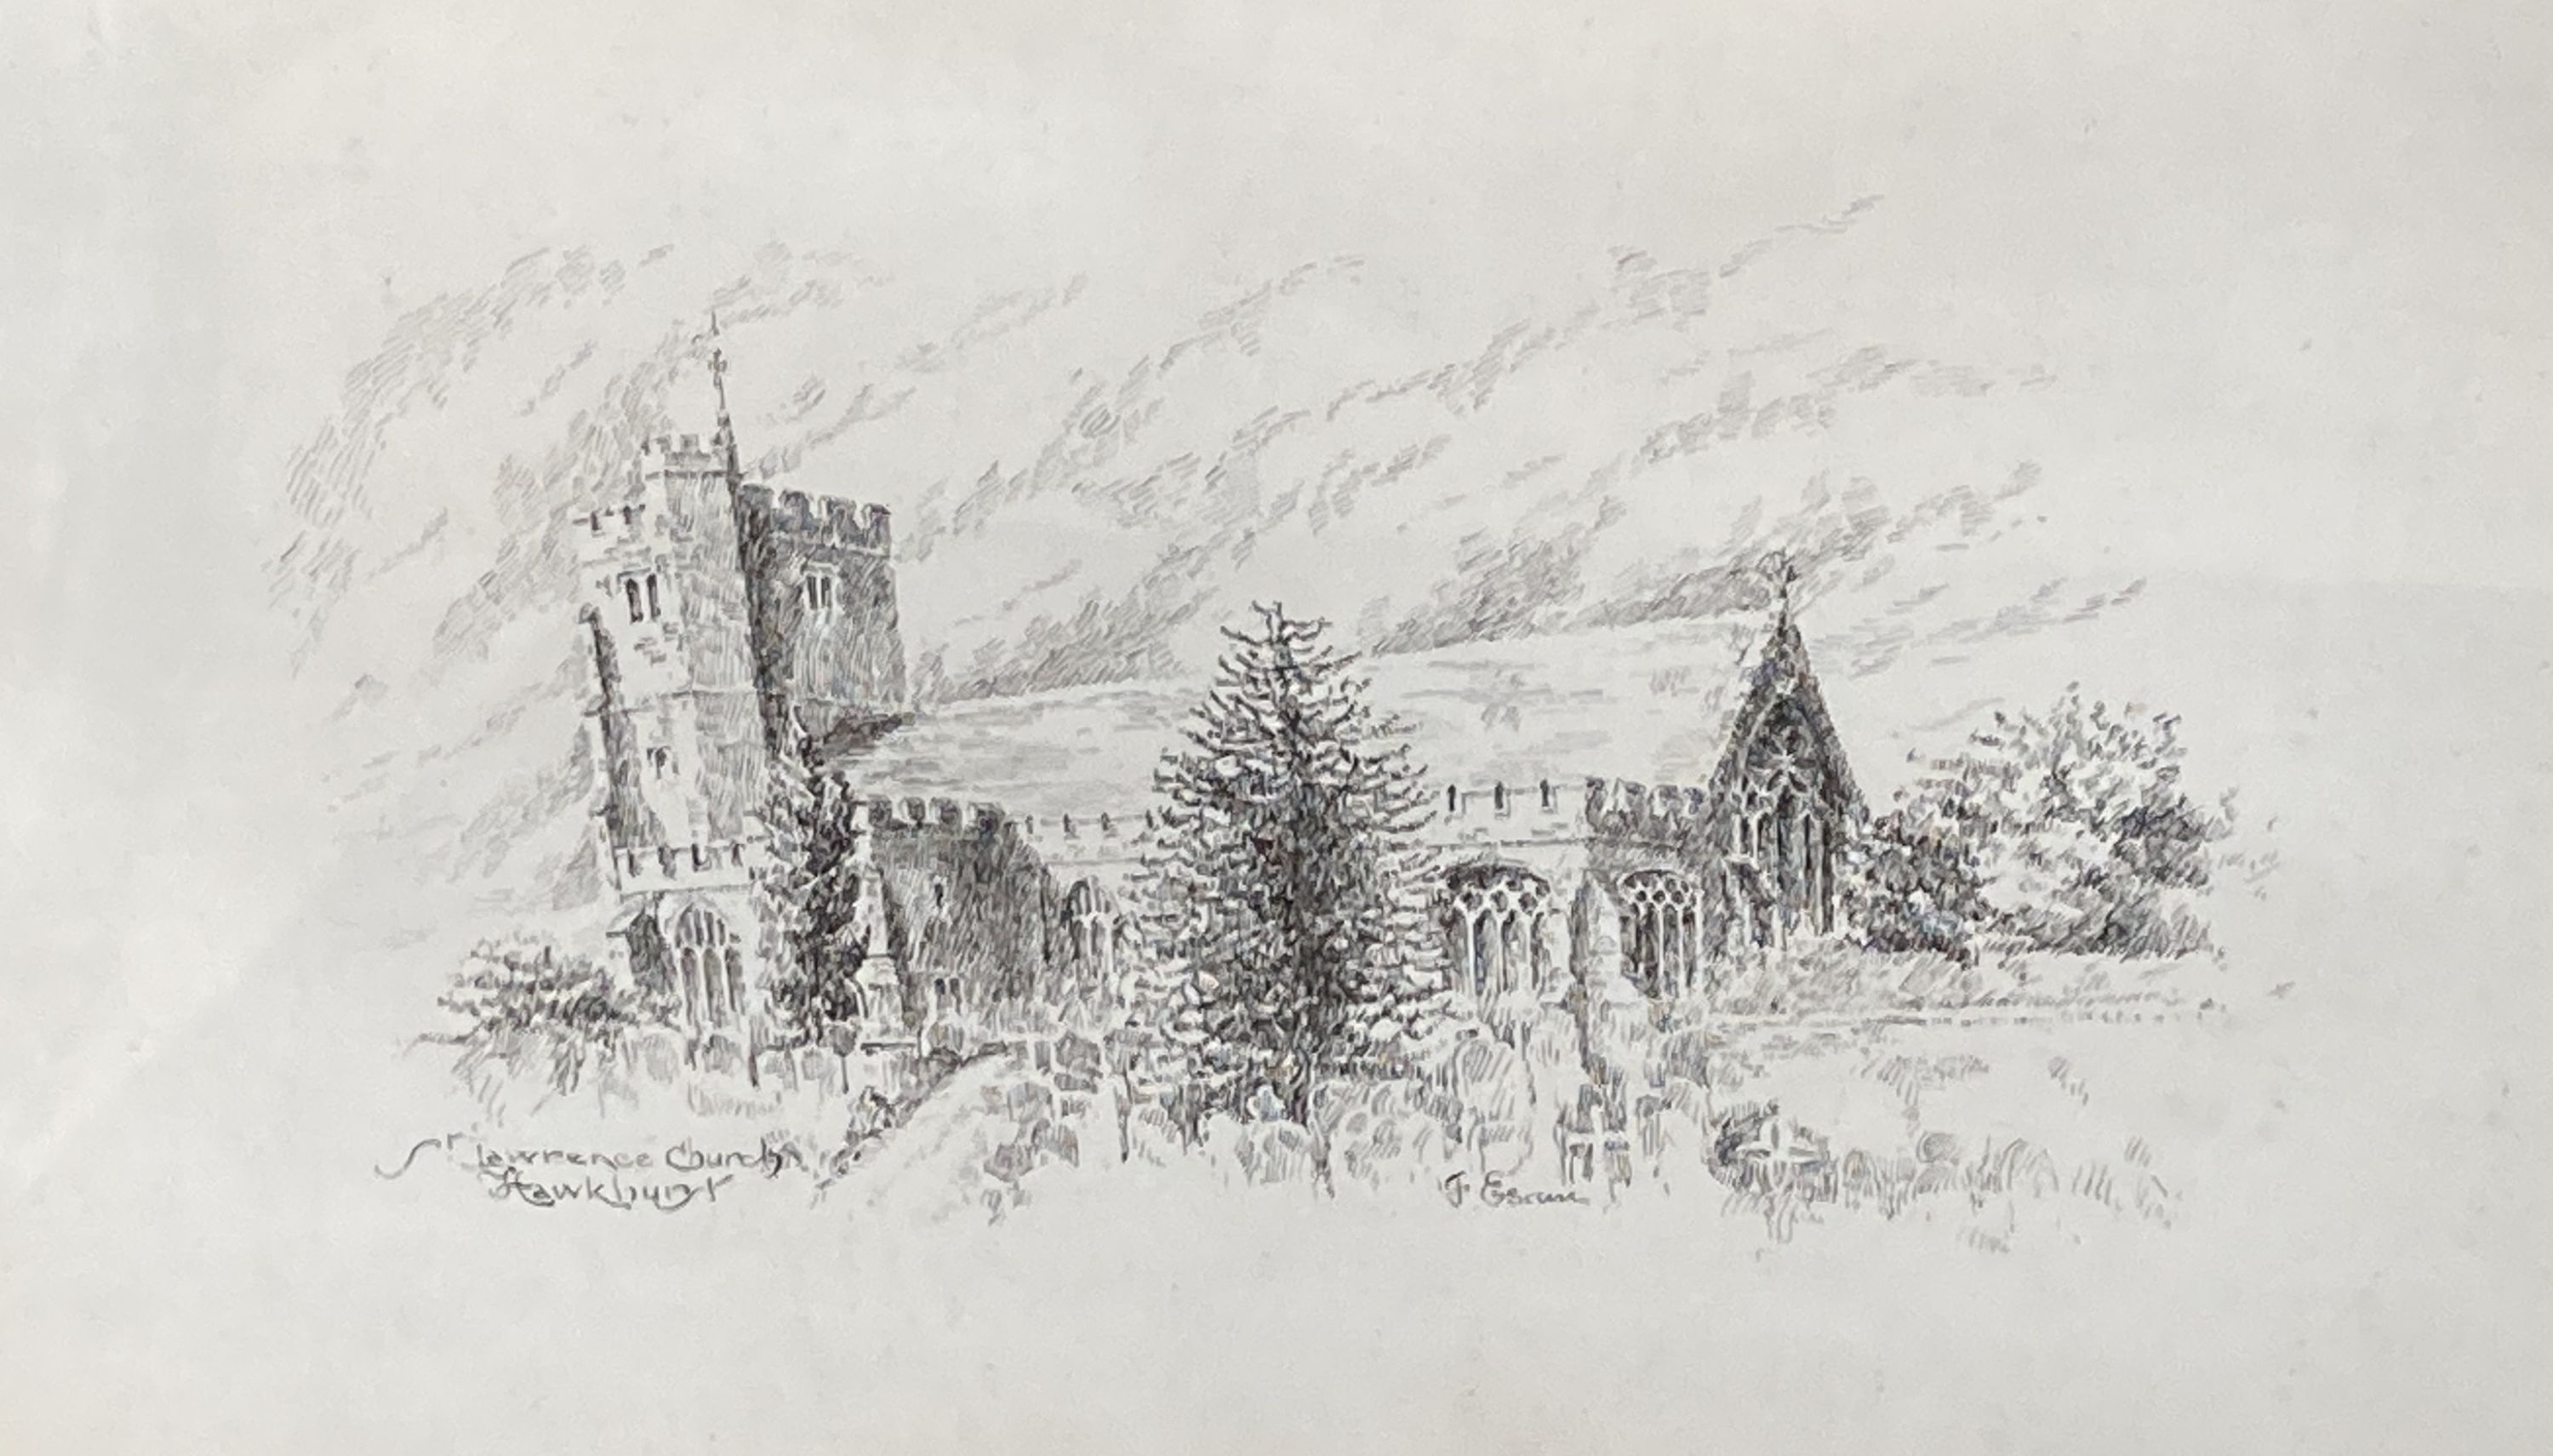 F. Esam c.1900, 5 pen and ink drawings: Highgate, Hawkhurst; Attwater; The Queen's Hotel, Hawkhurst; - Image 3 of 5